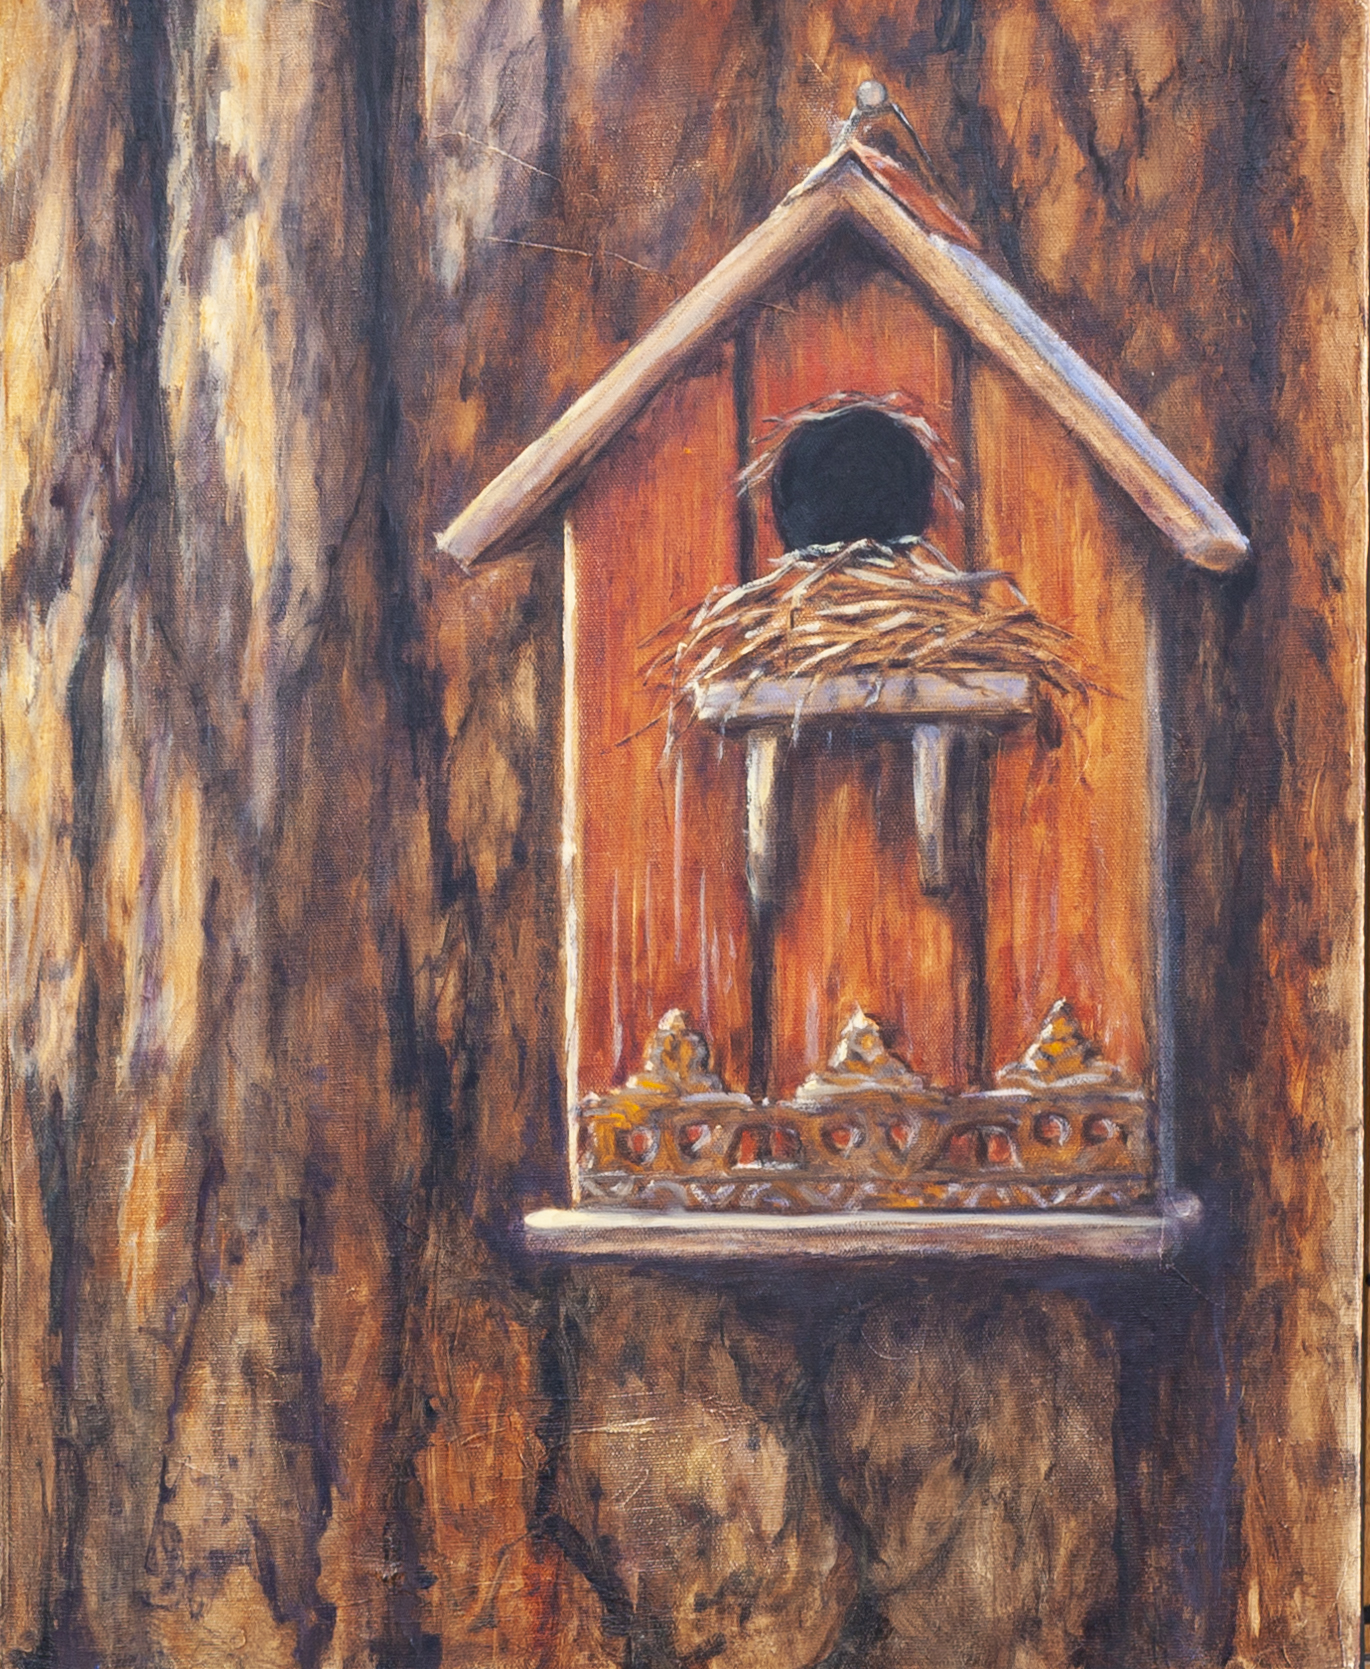 <b>SOLD</b> Home Sweet Home 16x20" Oil on Canvas by CJ Campbell